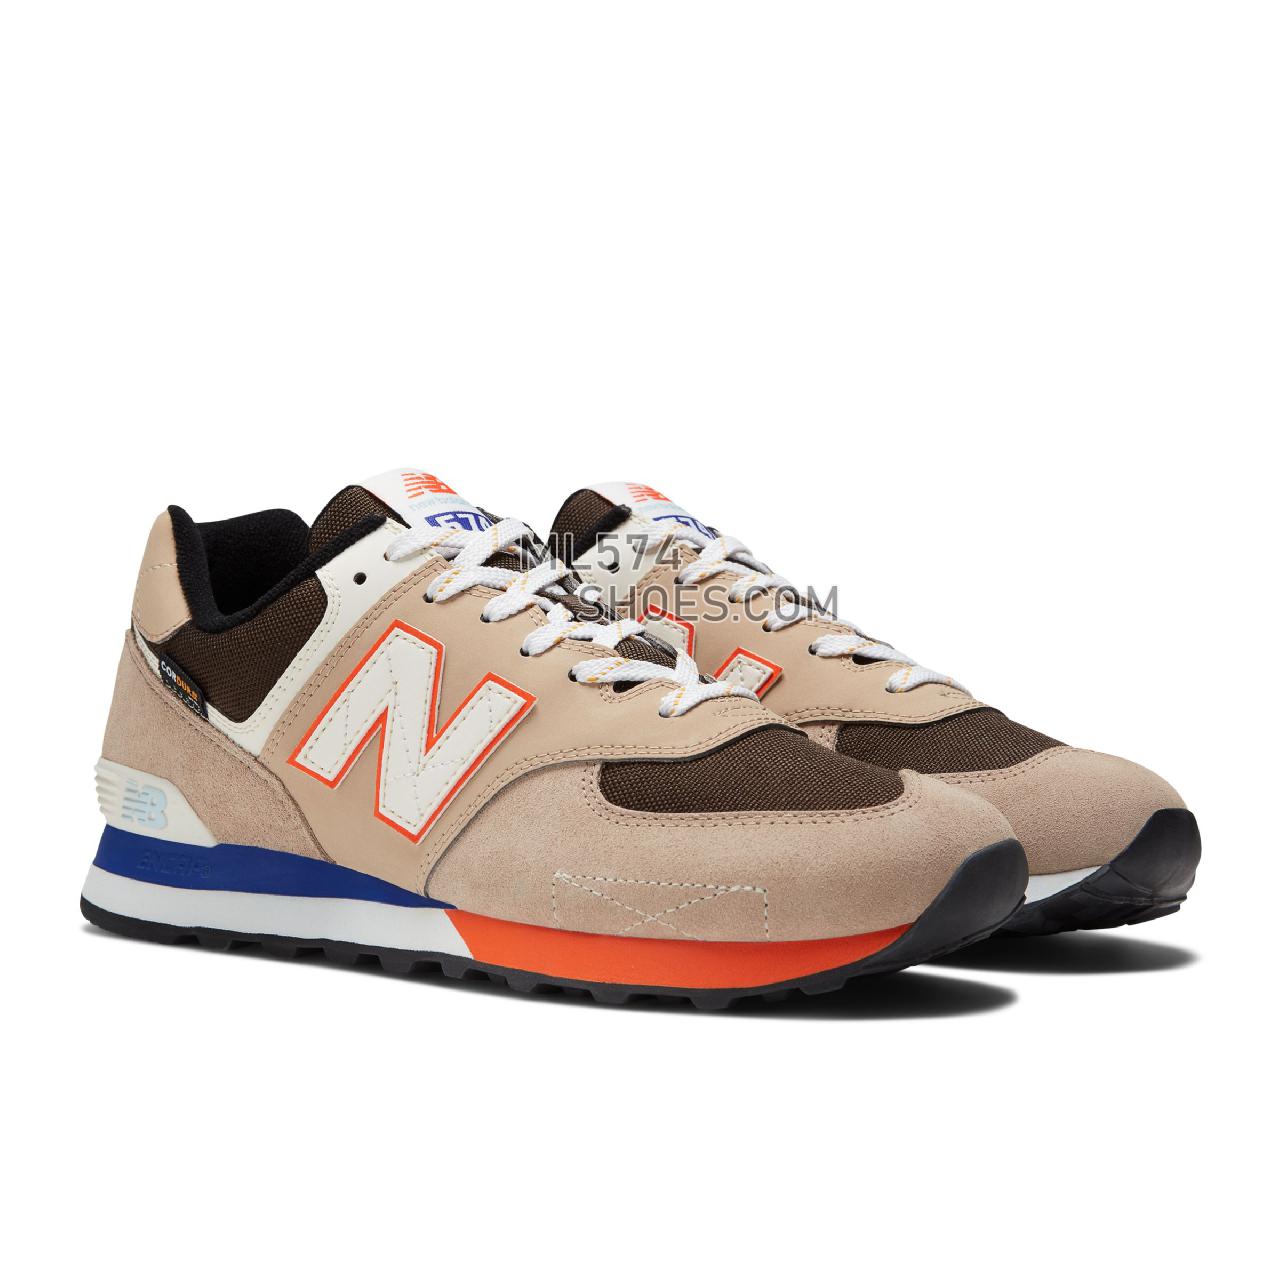 New Balance 574v2 - Men's Classic Sneakers - Mindful Grey with Poppy - ML574HQ2